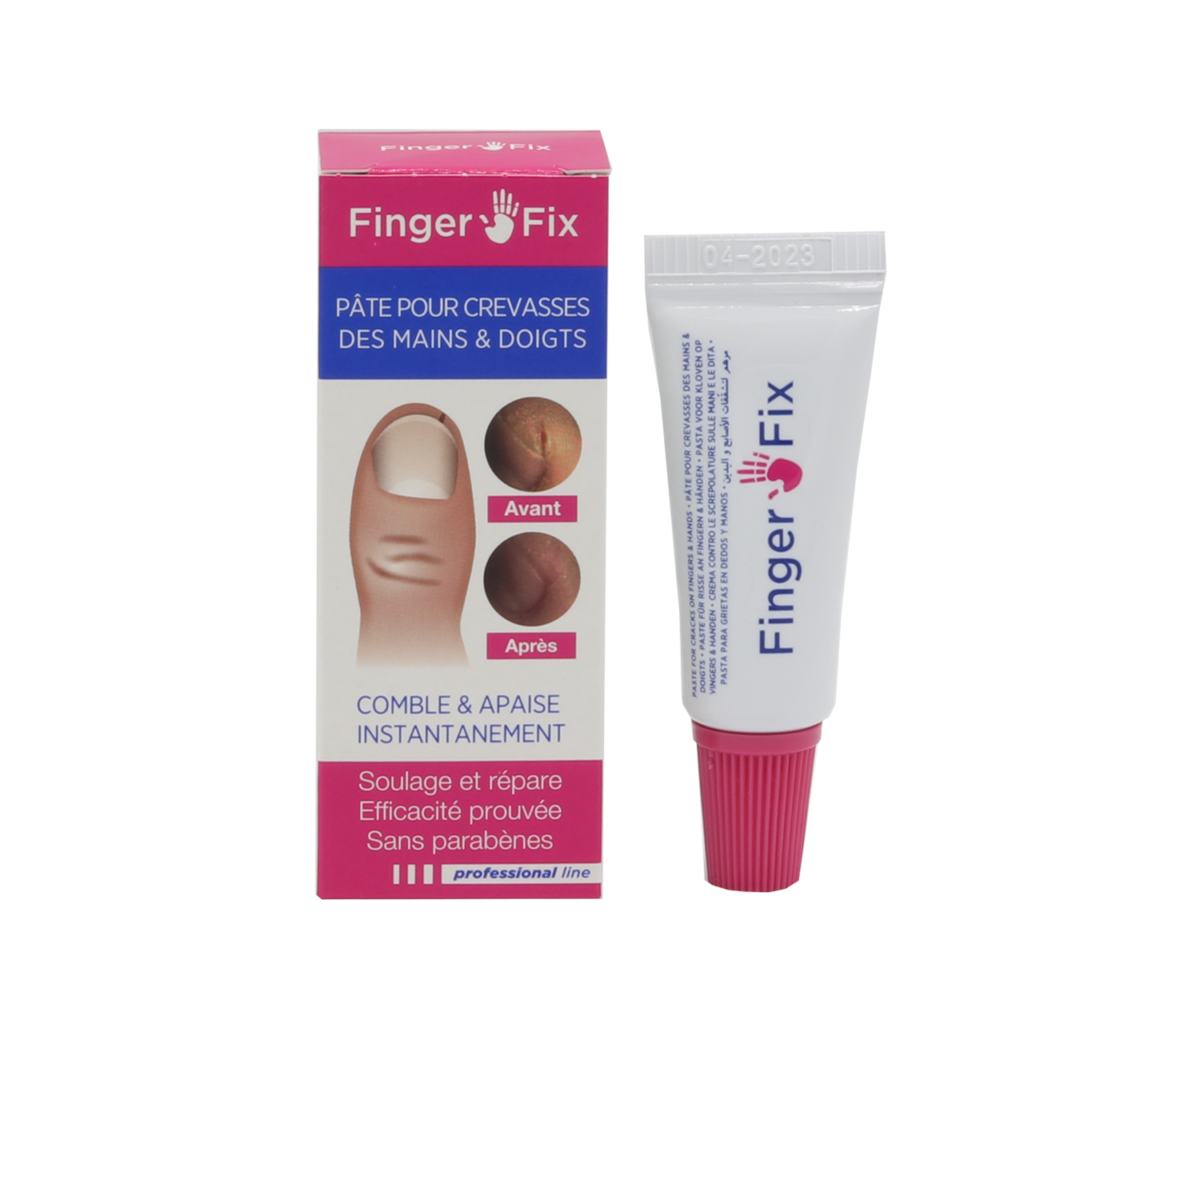 Professional FingerFix, 10g For crevices and chapped skin on hands